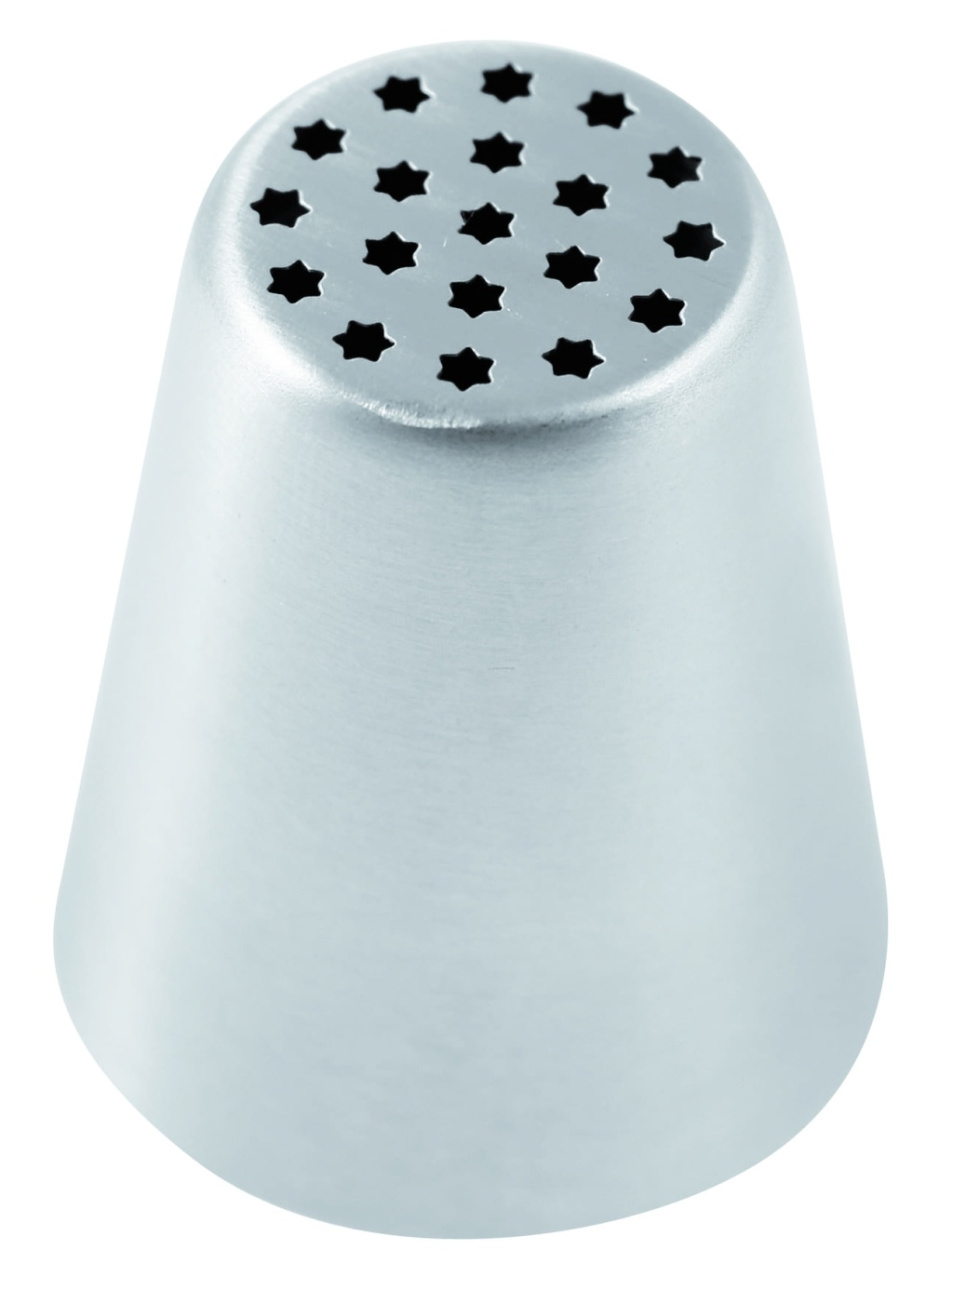 Star nozzle, BX0009 - Martellato in the group Baking / Baking utensils / Piping & nozzles at KitchenLab (1710-19046)